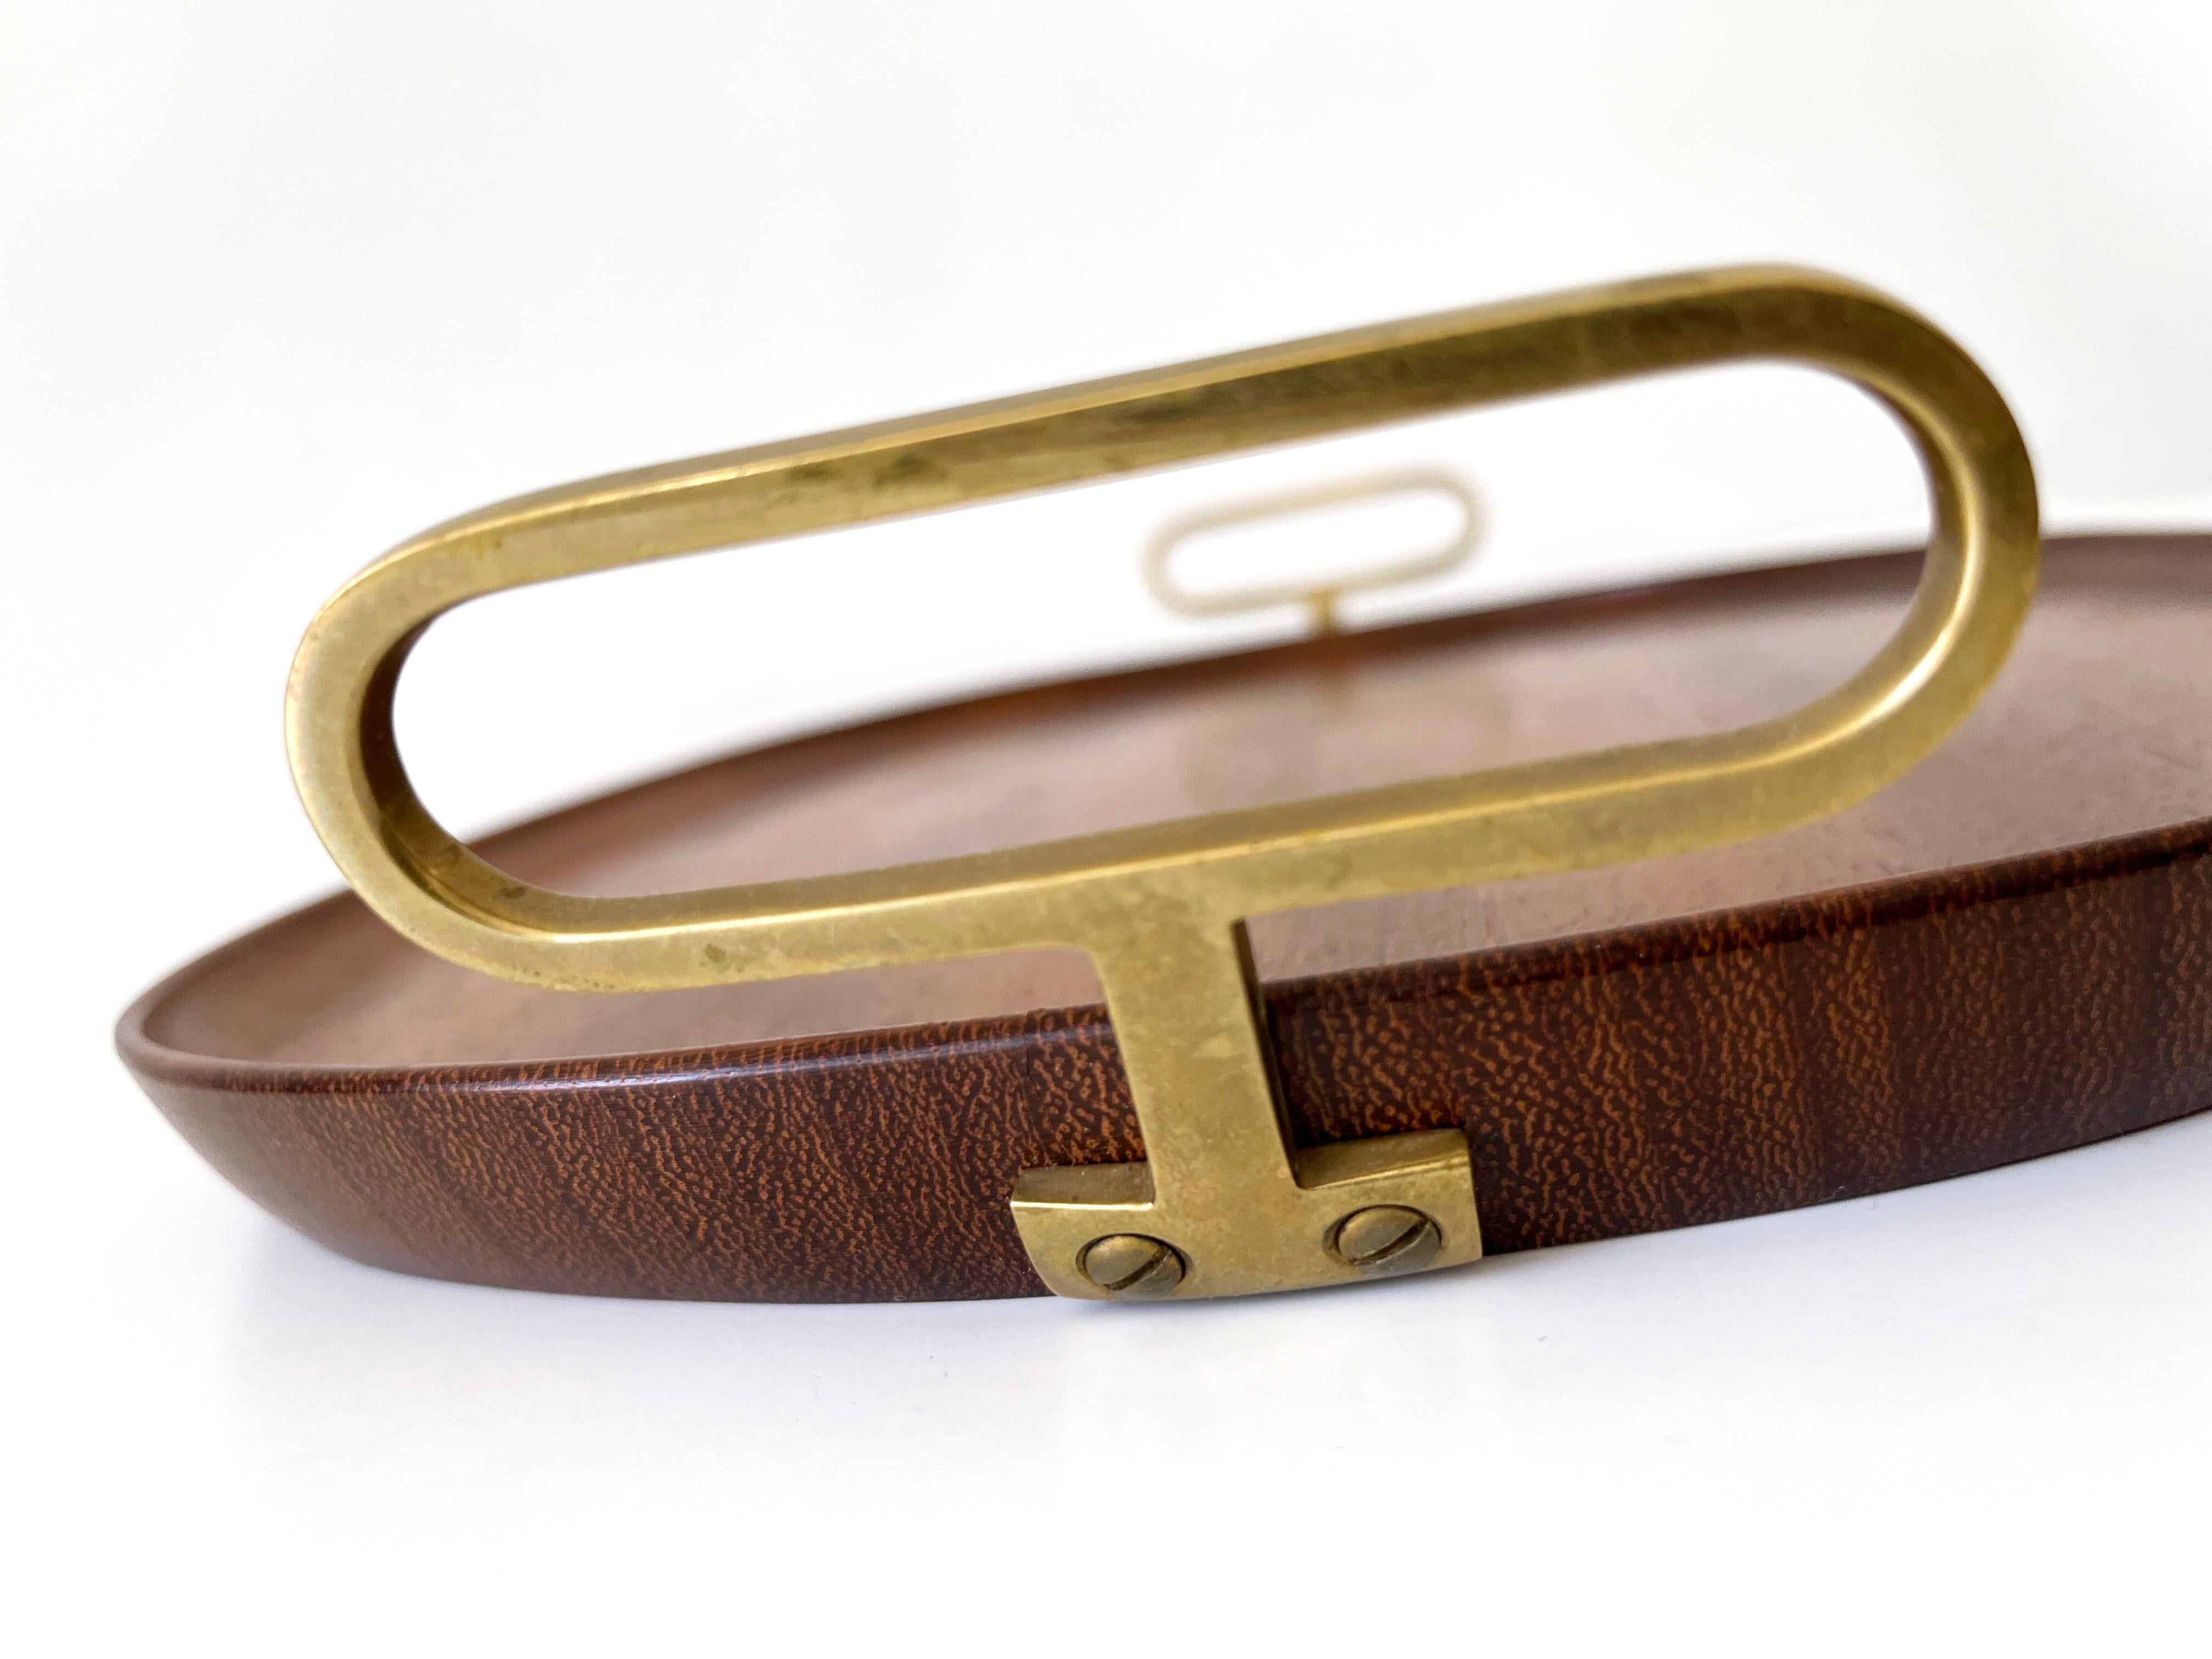 Extremely Rare Mid-Century Modern Teak Serving Tray by Carl Auböck Austria 1950s For Sale 7